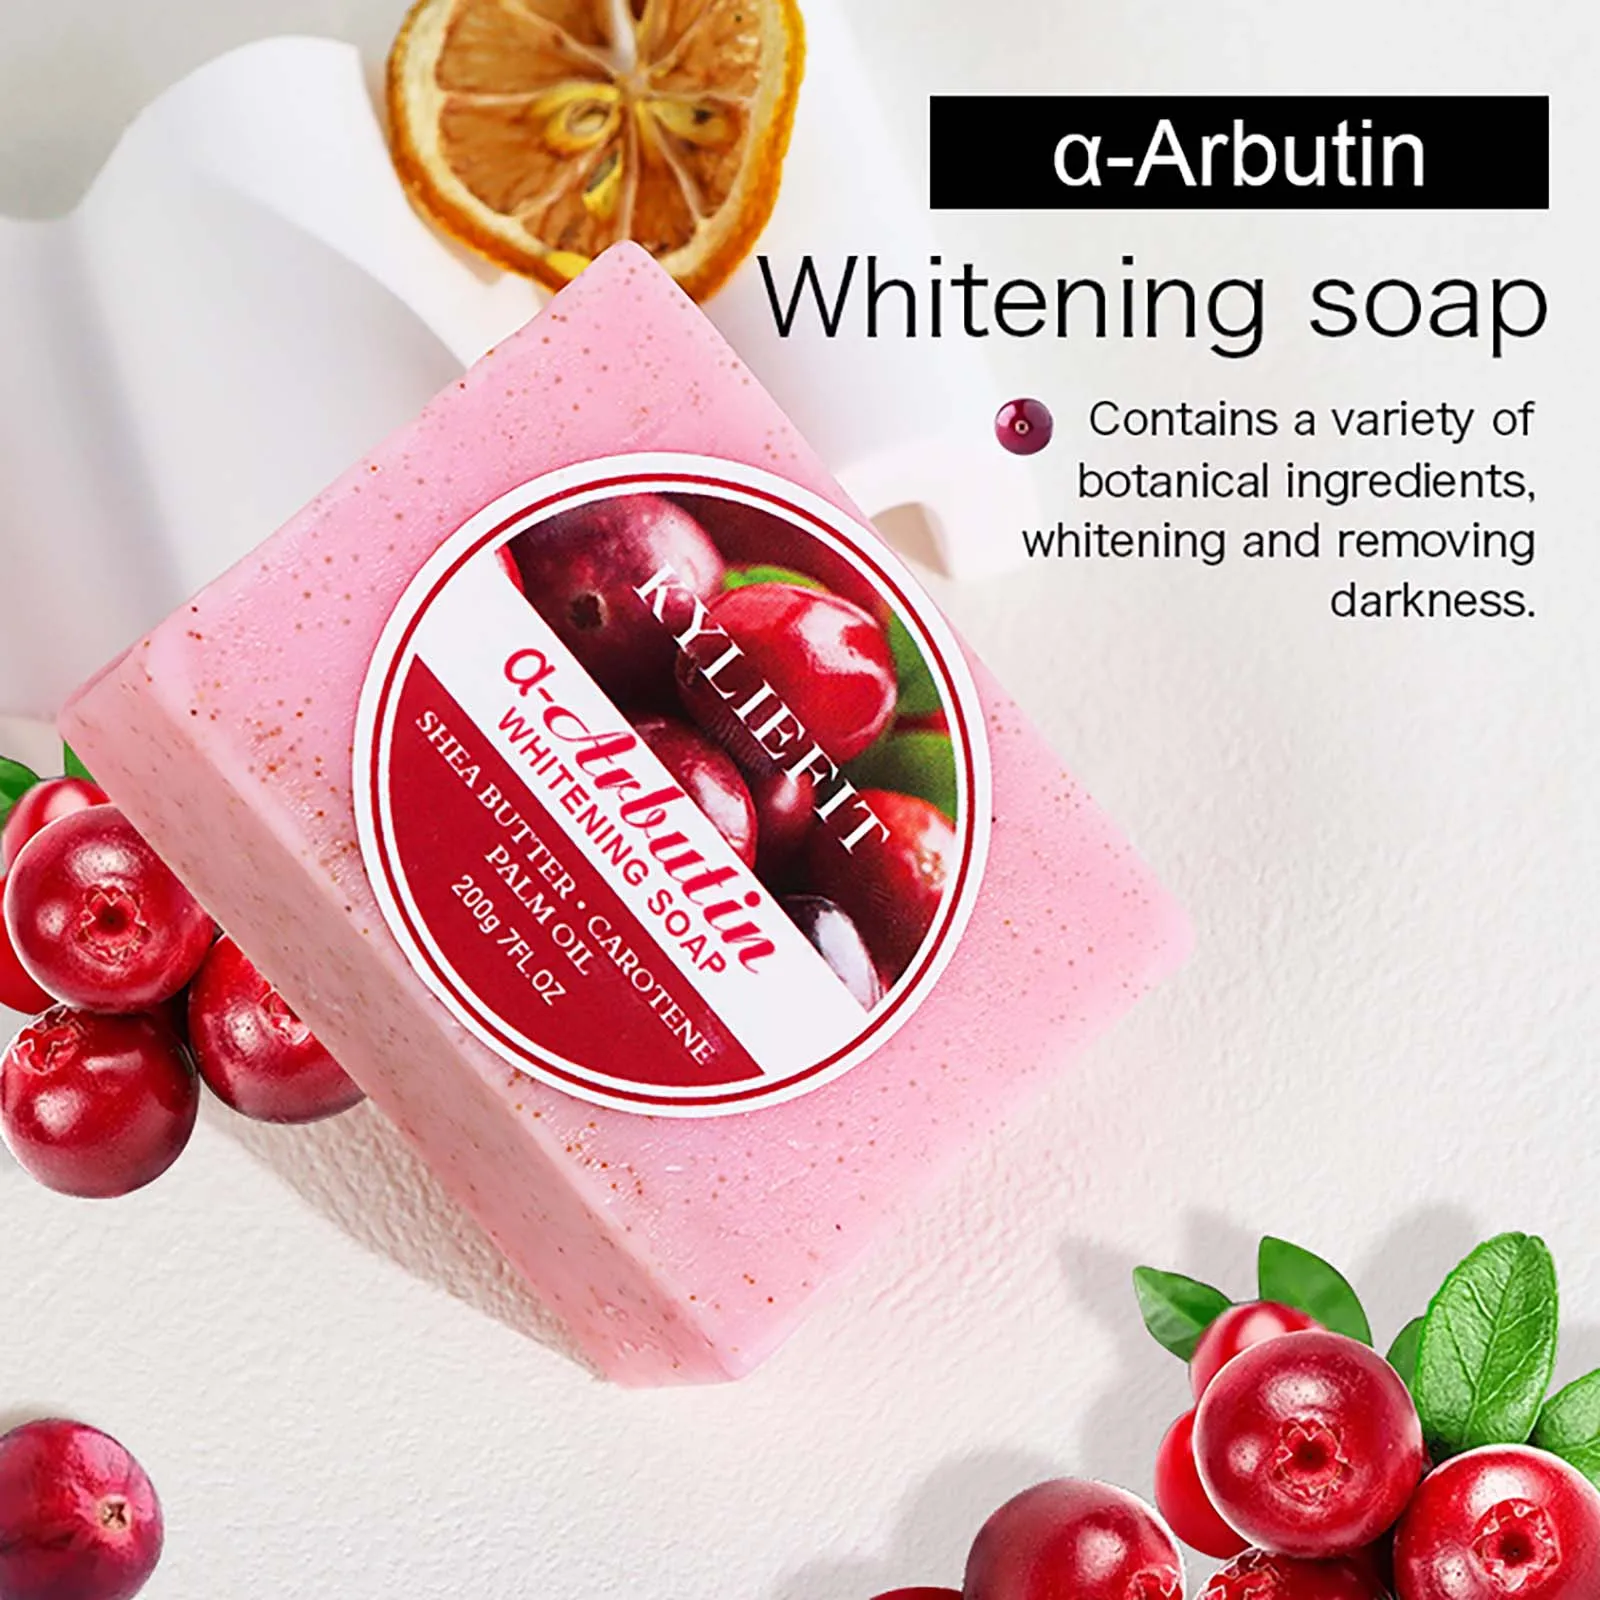 Whitening Soap Bar For Face And Body, With Shea Butter, Carotene, Palm Oil, Arbutin, Reduce Dark Spots, Hyperpigmentation